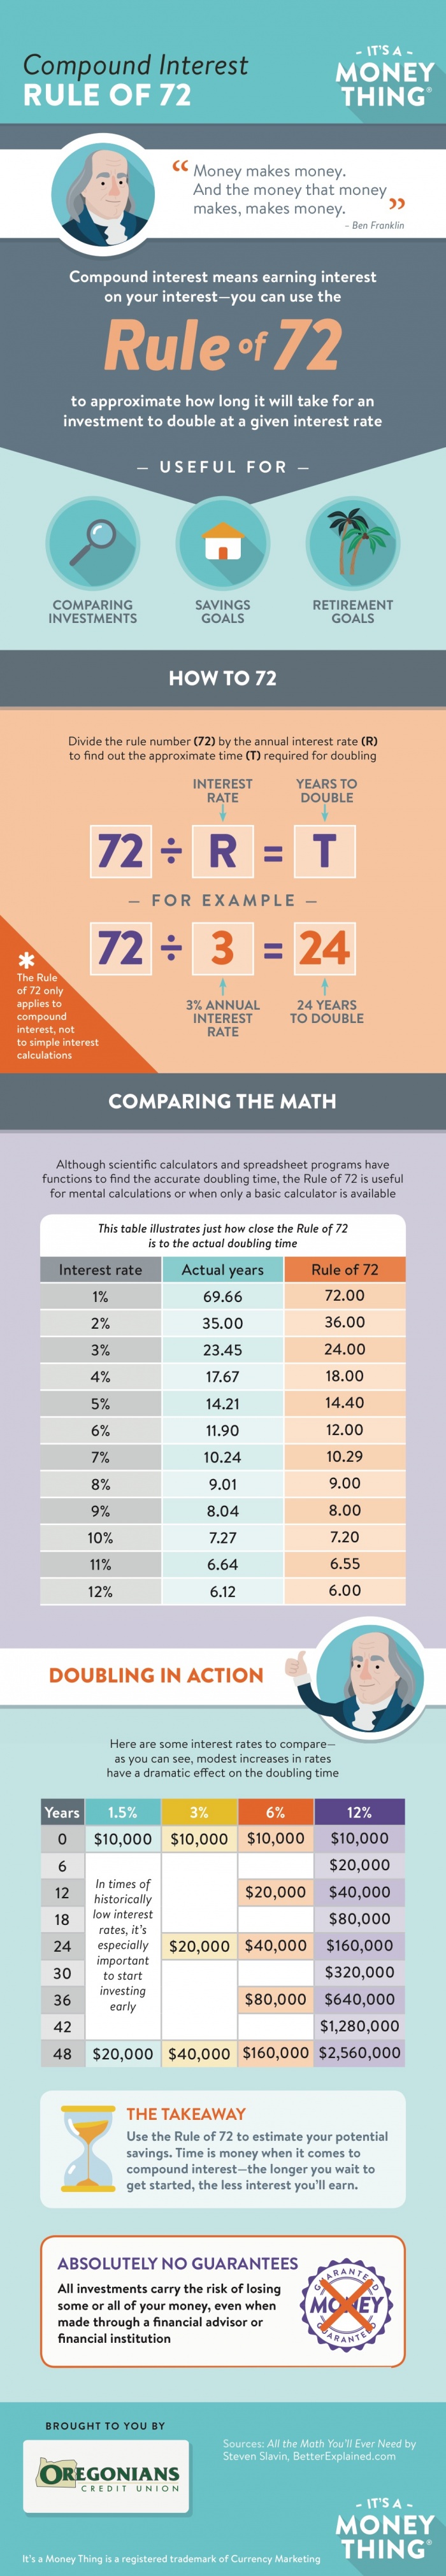 The Rule of 72 Infographic